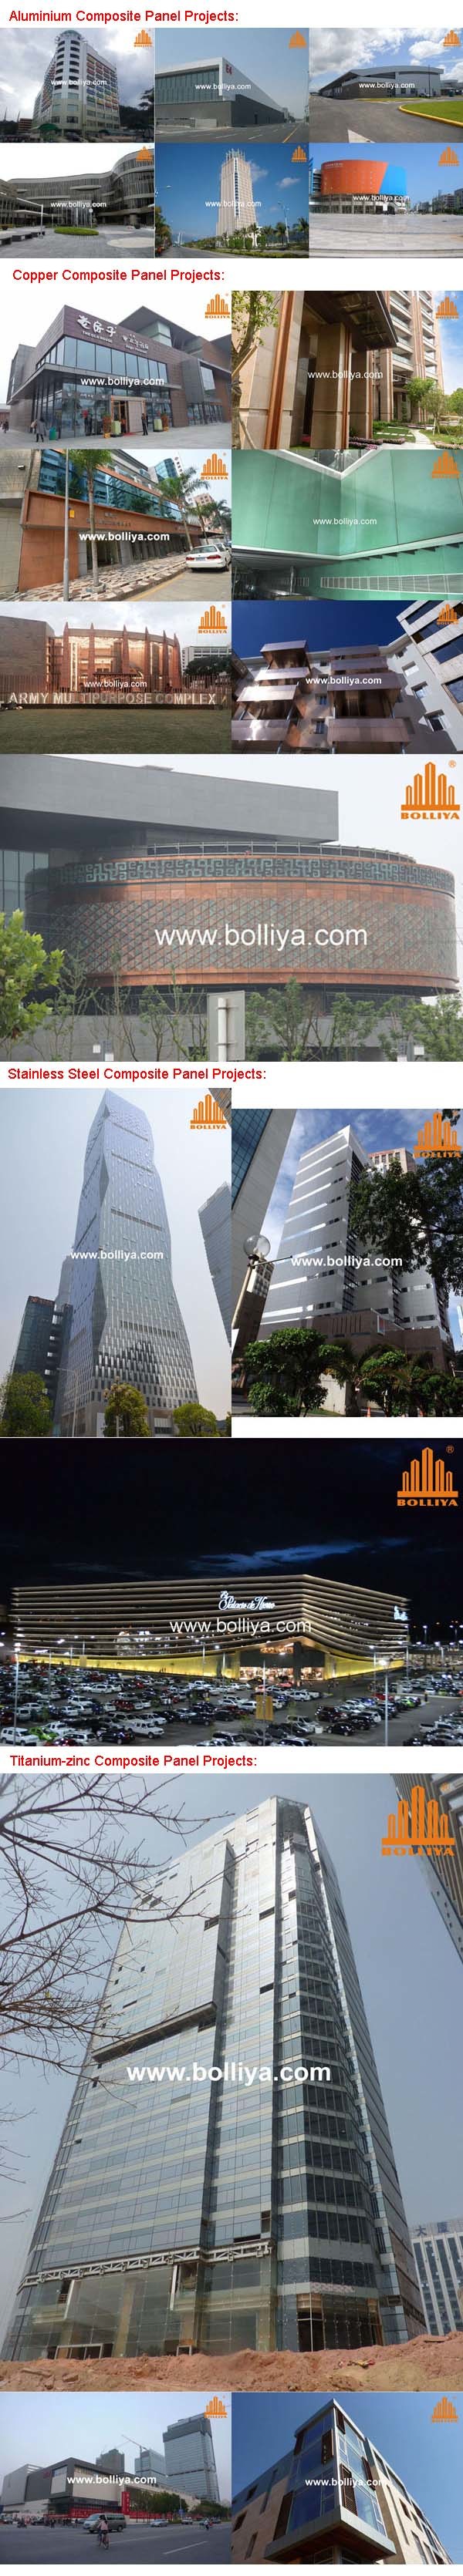 Stainless Steel Composite Metal Cladding